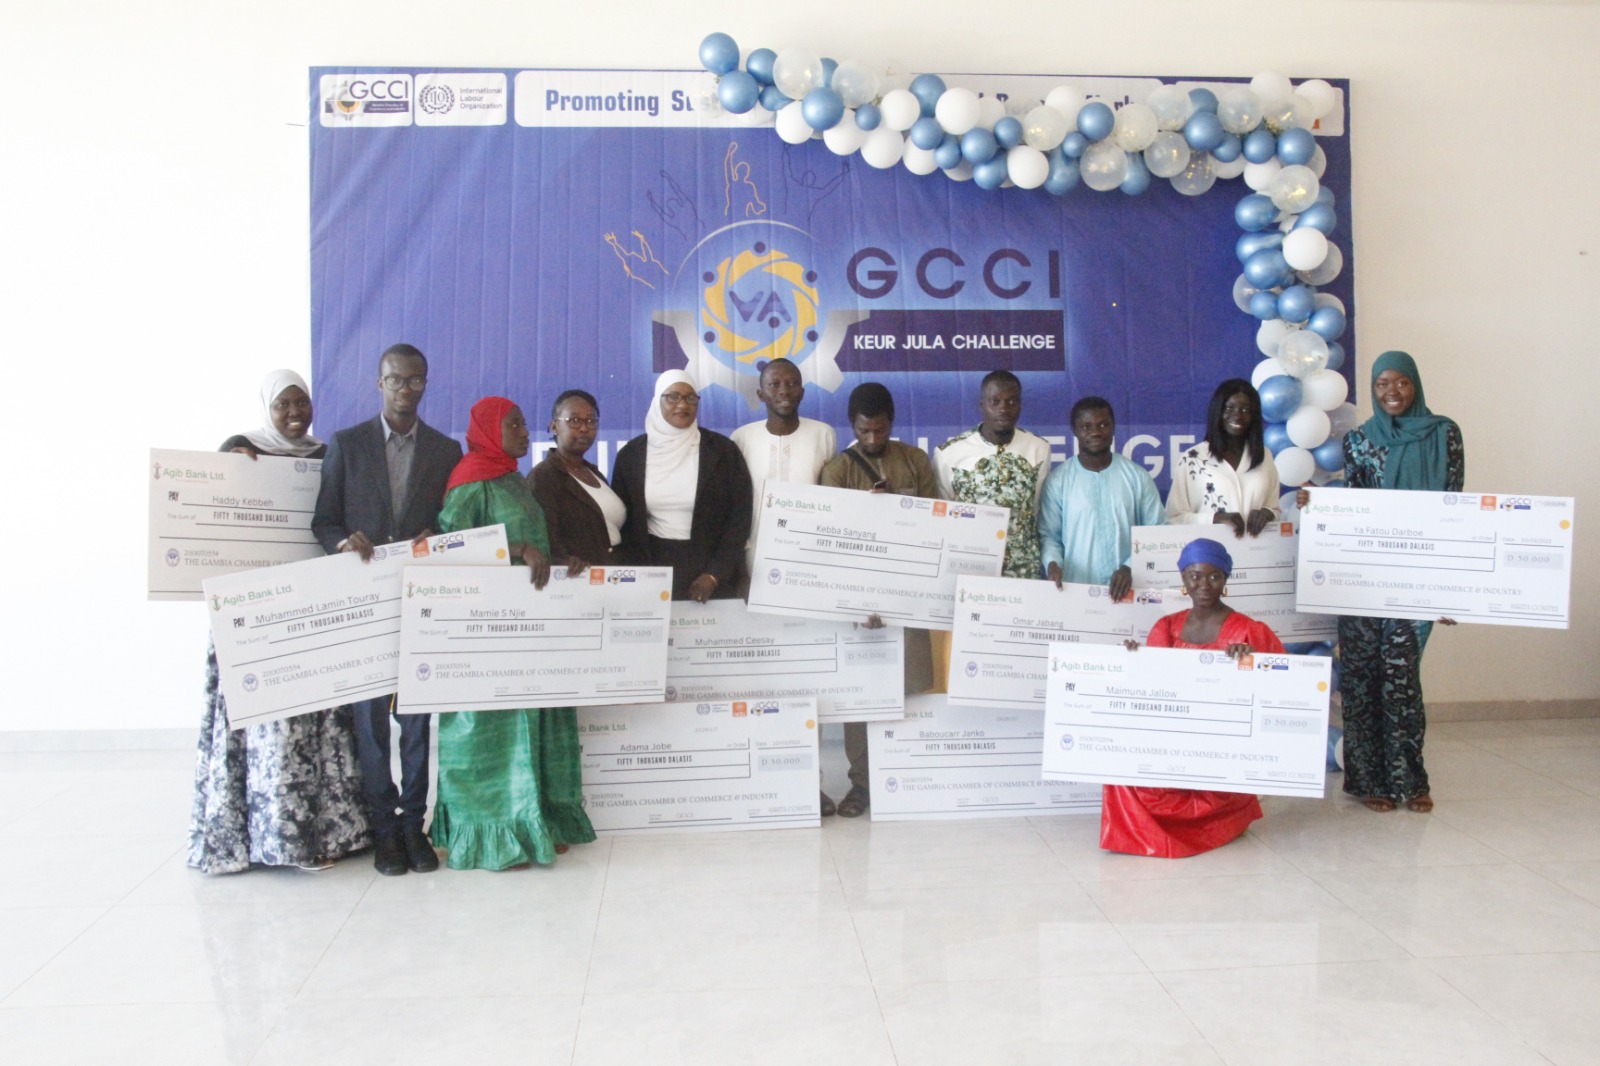 Gambia News GCCI AWARDS 19 WINNERS OF NATIONAL BUSINESS PLAN COMPETITION